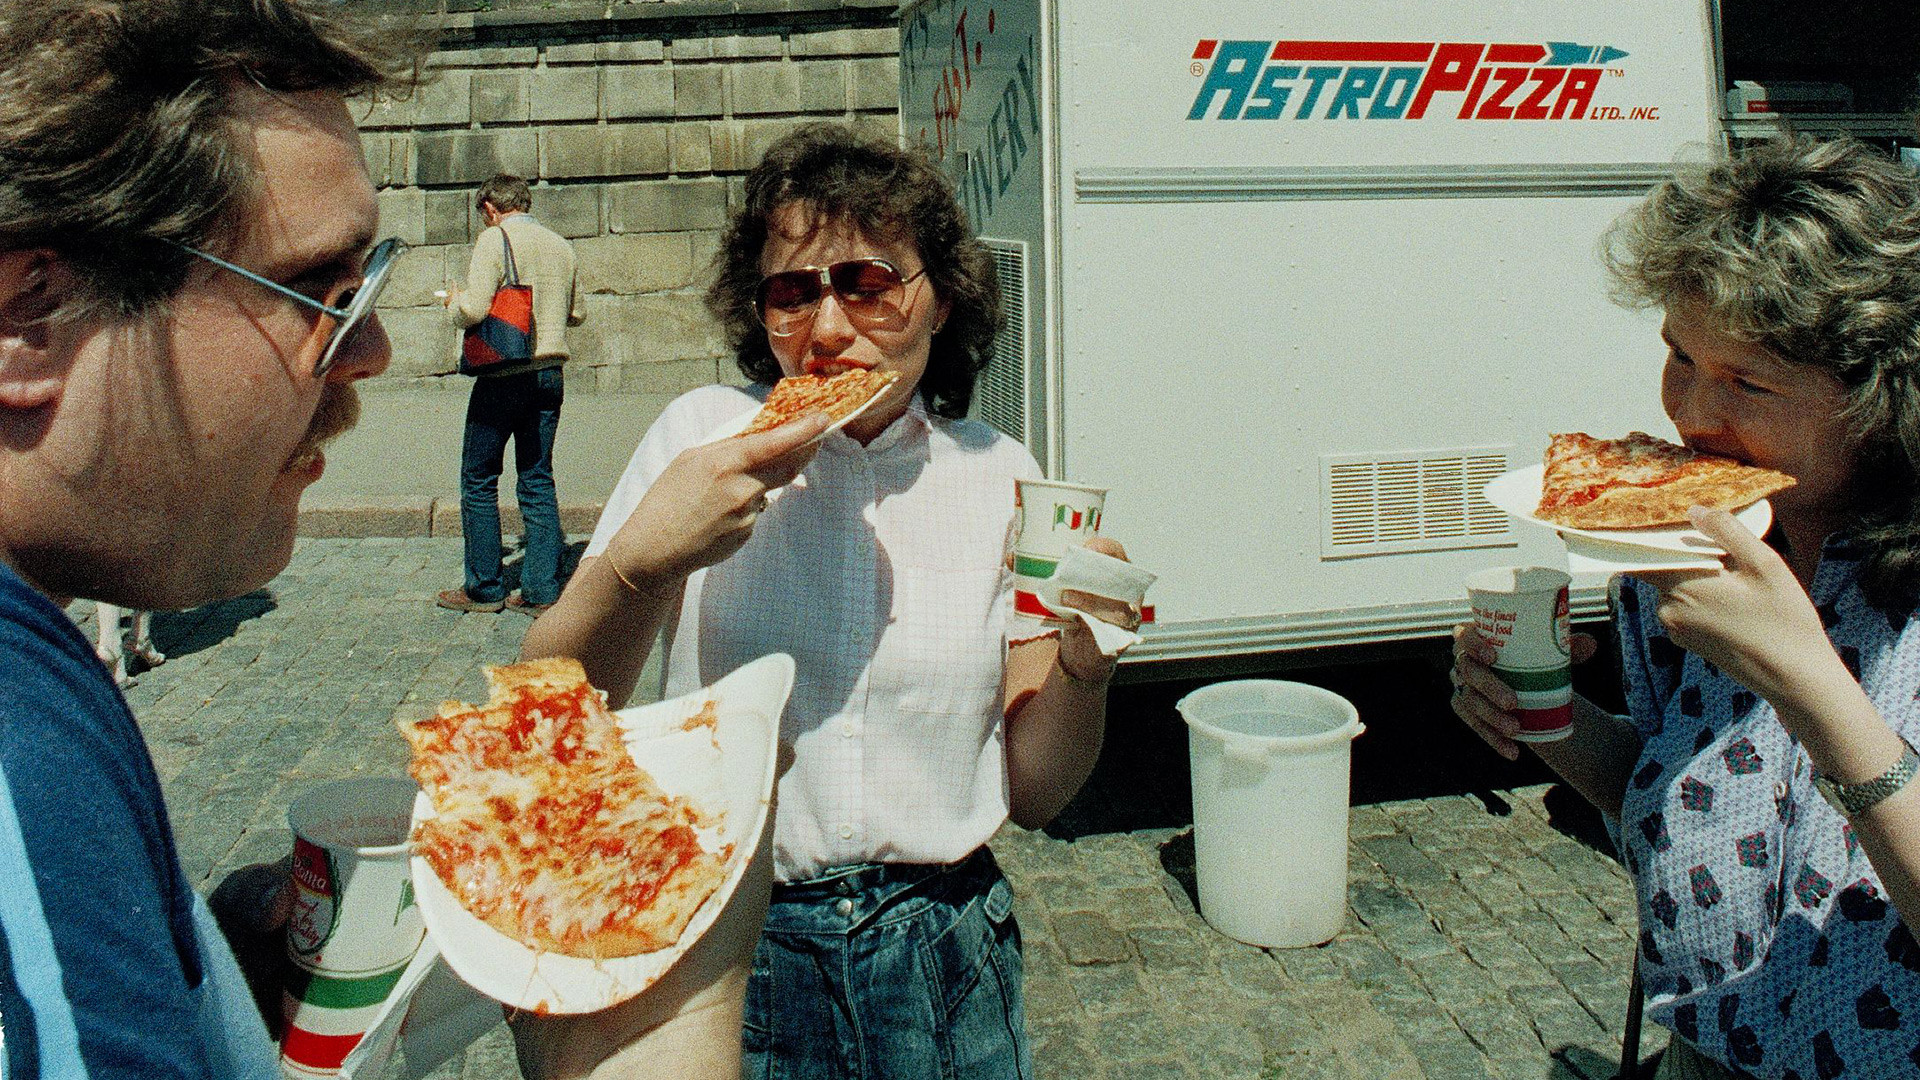 Soviets eat American-style pizza from the truck in Red Square in Moscow, May 28, 1988.